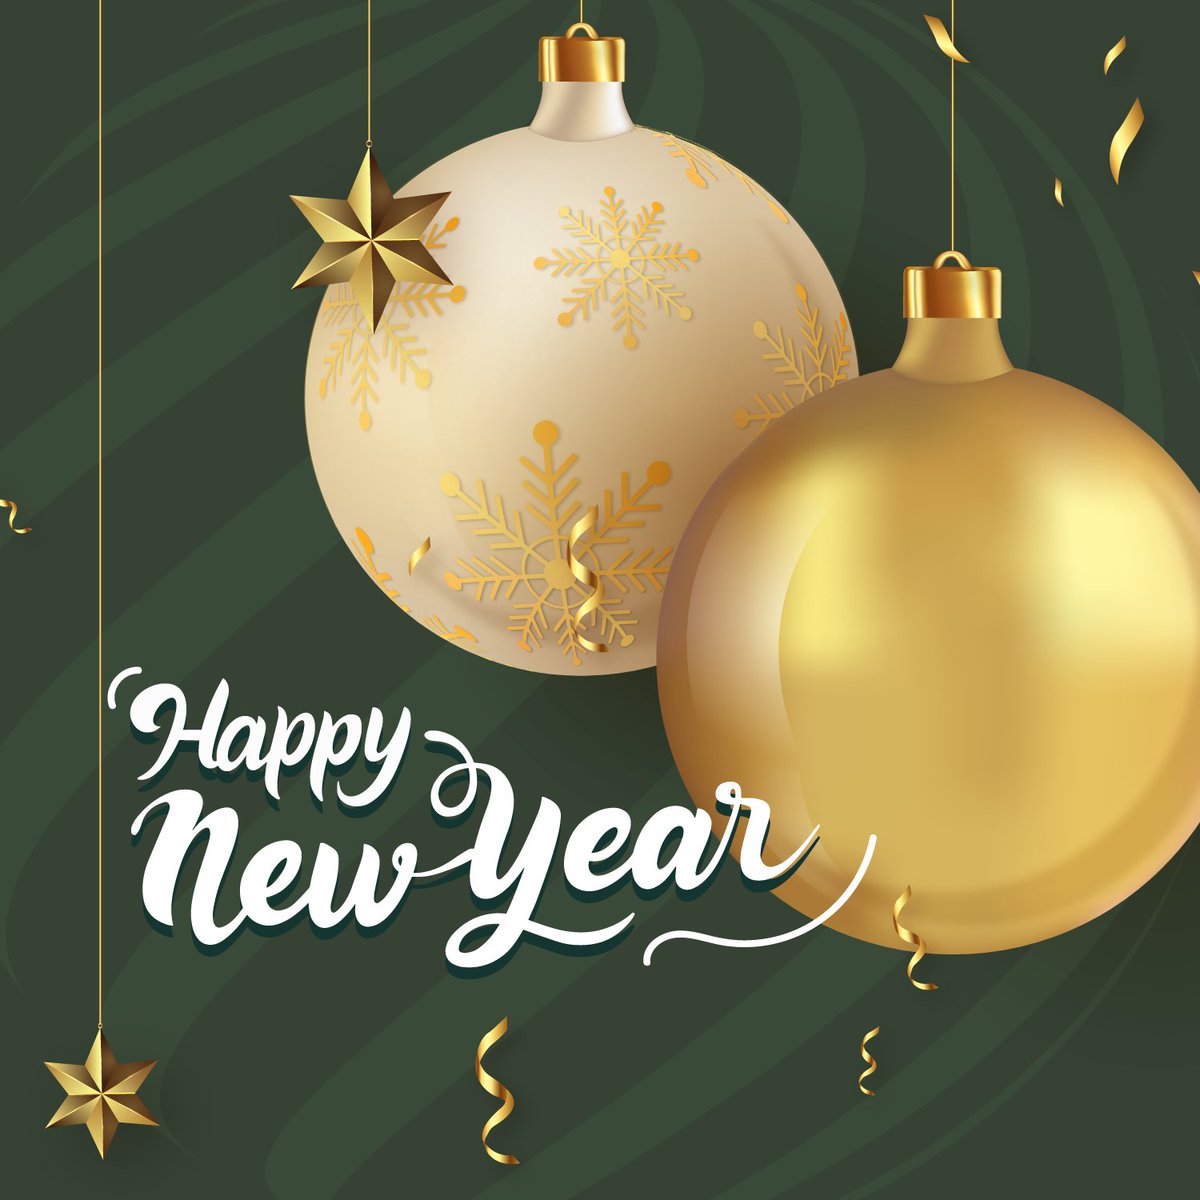 “Cheers to a new year and another chance for us to get it right.” —Oprah Winfrey

Happy New Year to you and your loved ones!

#Newyear #Happynewyear #2023
 #HomeForSale #SimiValleyHOmes #ThousandOaksHOmesforSale #MoorparkHomesForSale #VenturaCountyHomeForSale